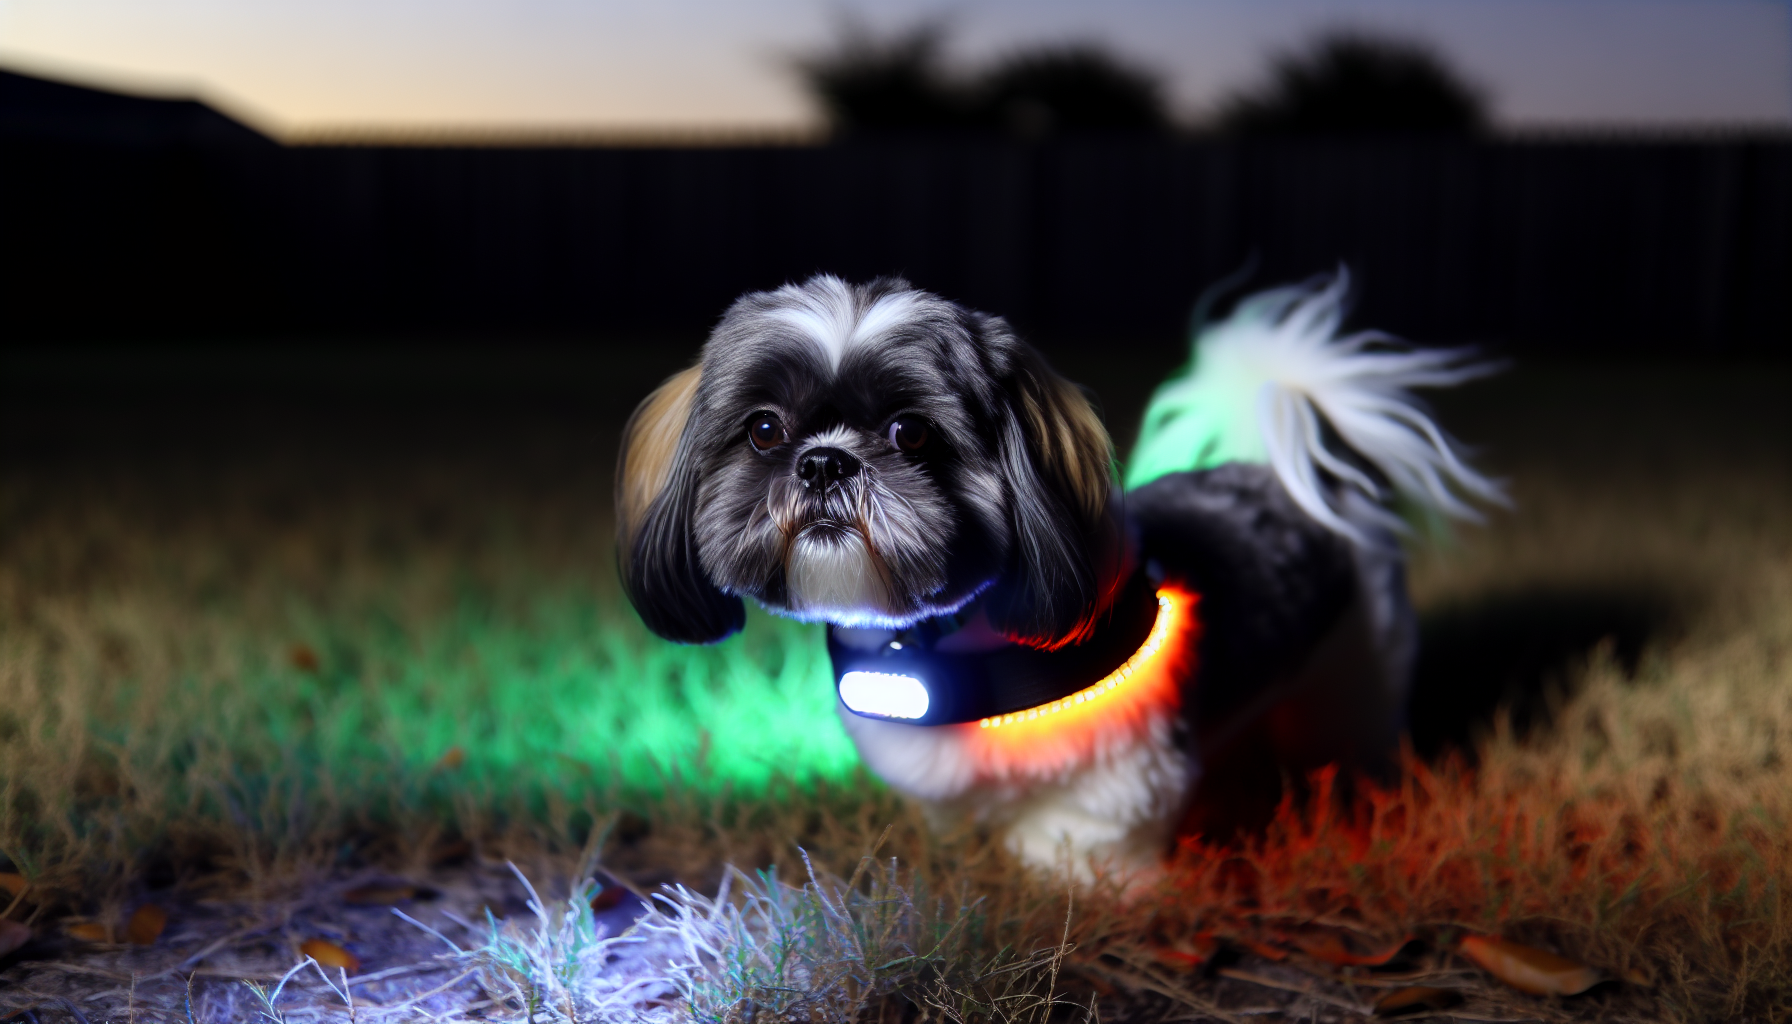 Blazin LED LightUp Collar for night safety